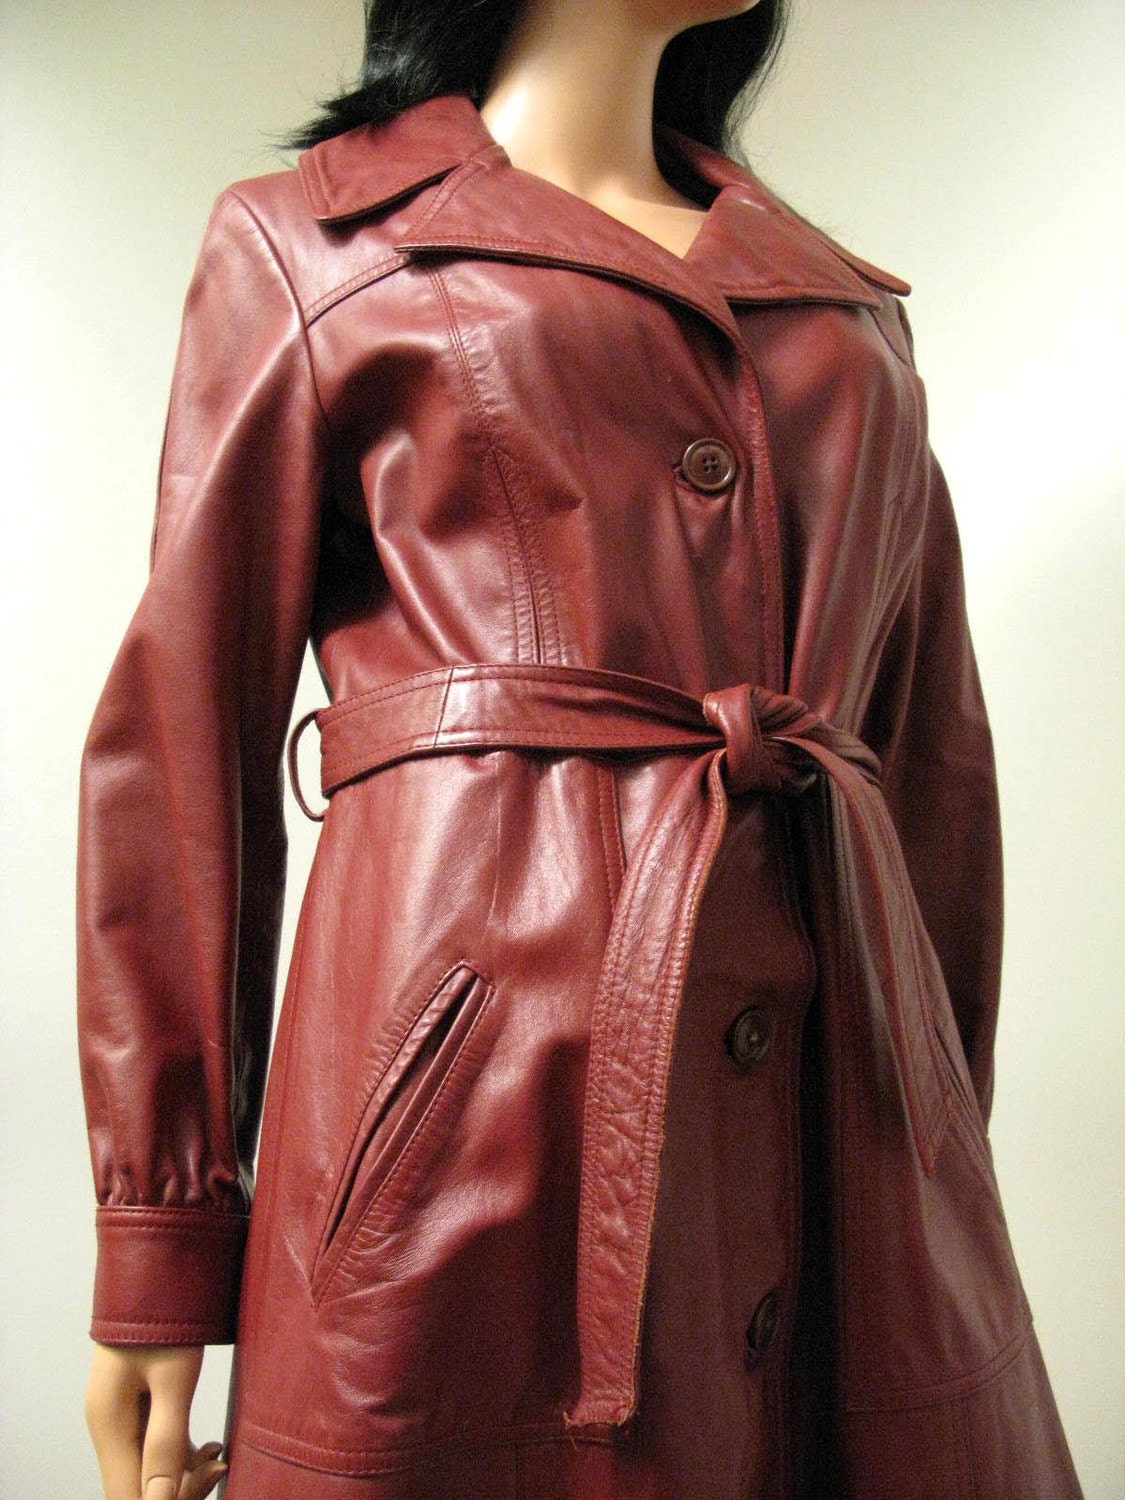 Long Leather Trench Coat - Vintage 70s Reddish Brown Leather Spy Girl Coat S M FREE US Shipping